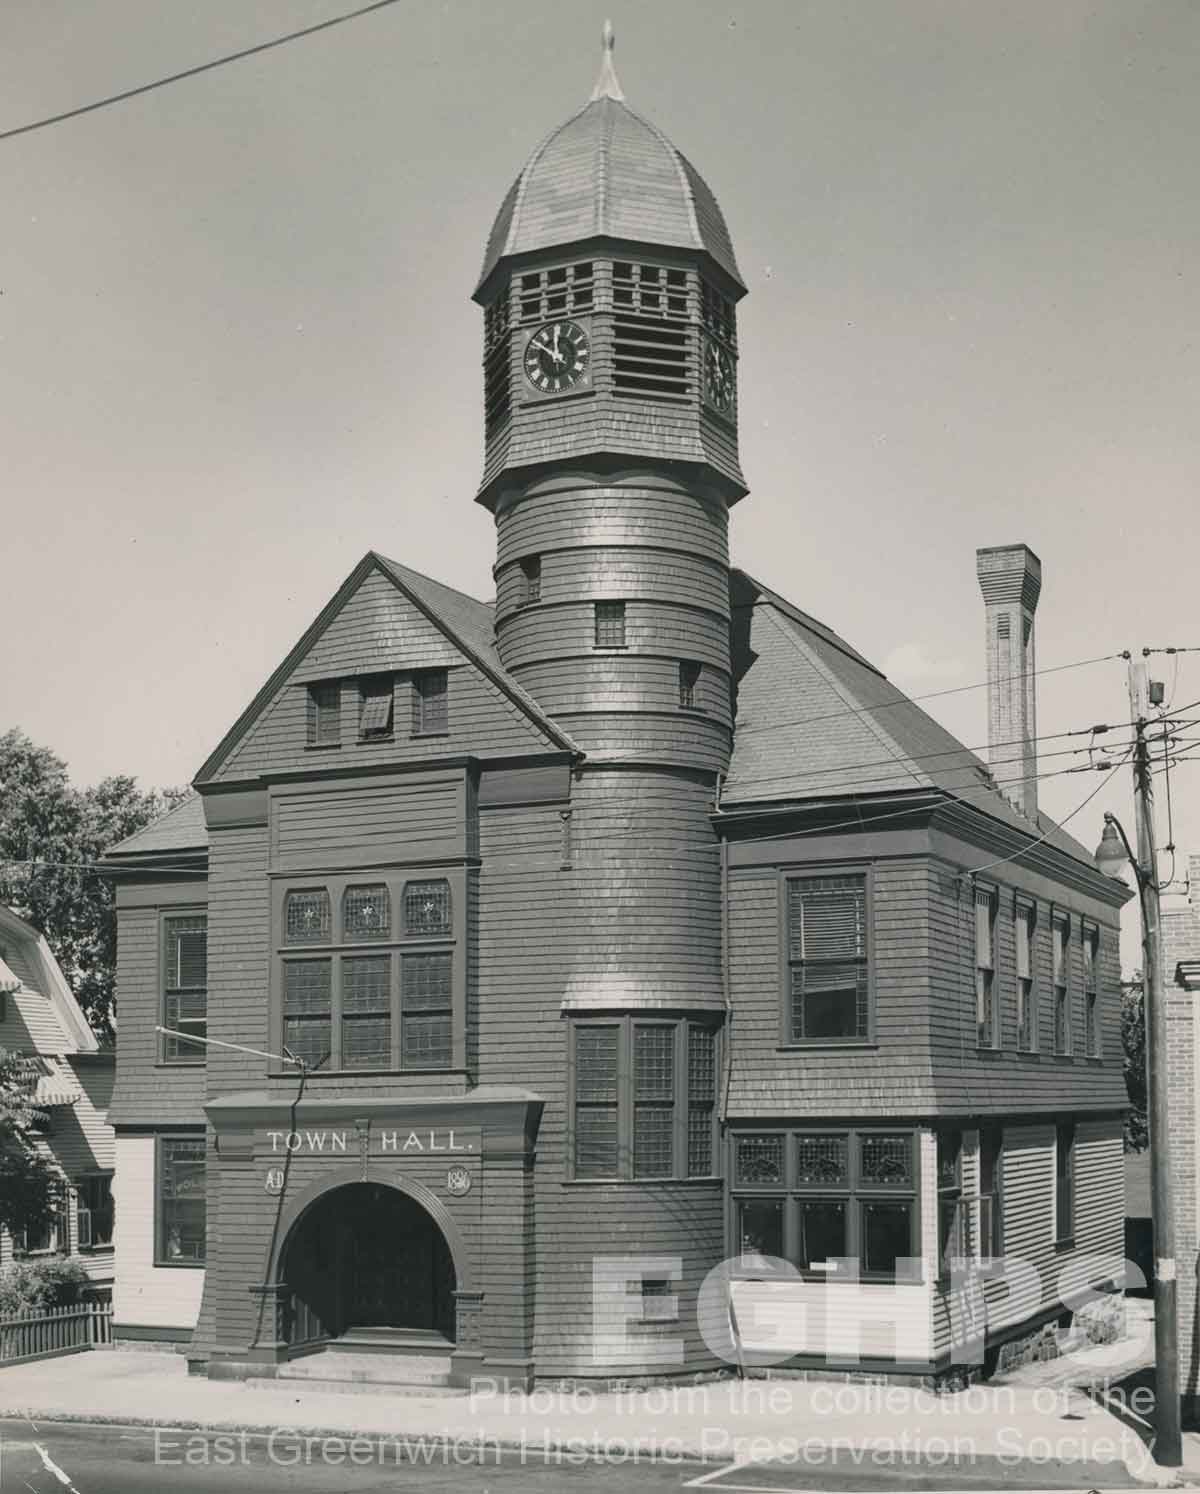 The Old East Greenwich Town Hall on Main Street.